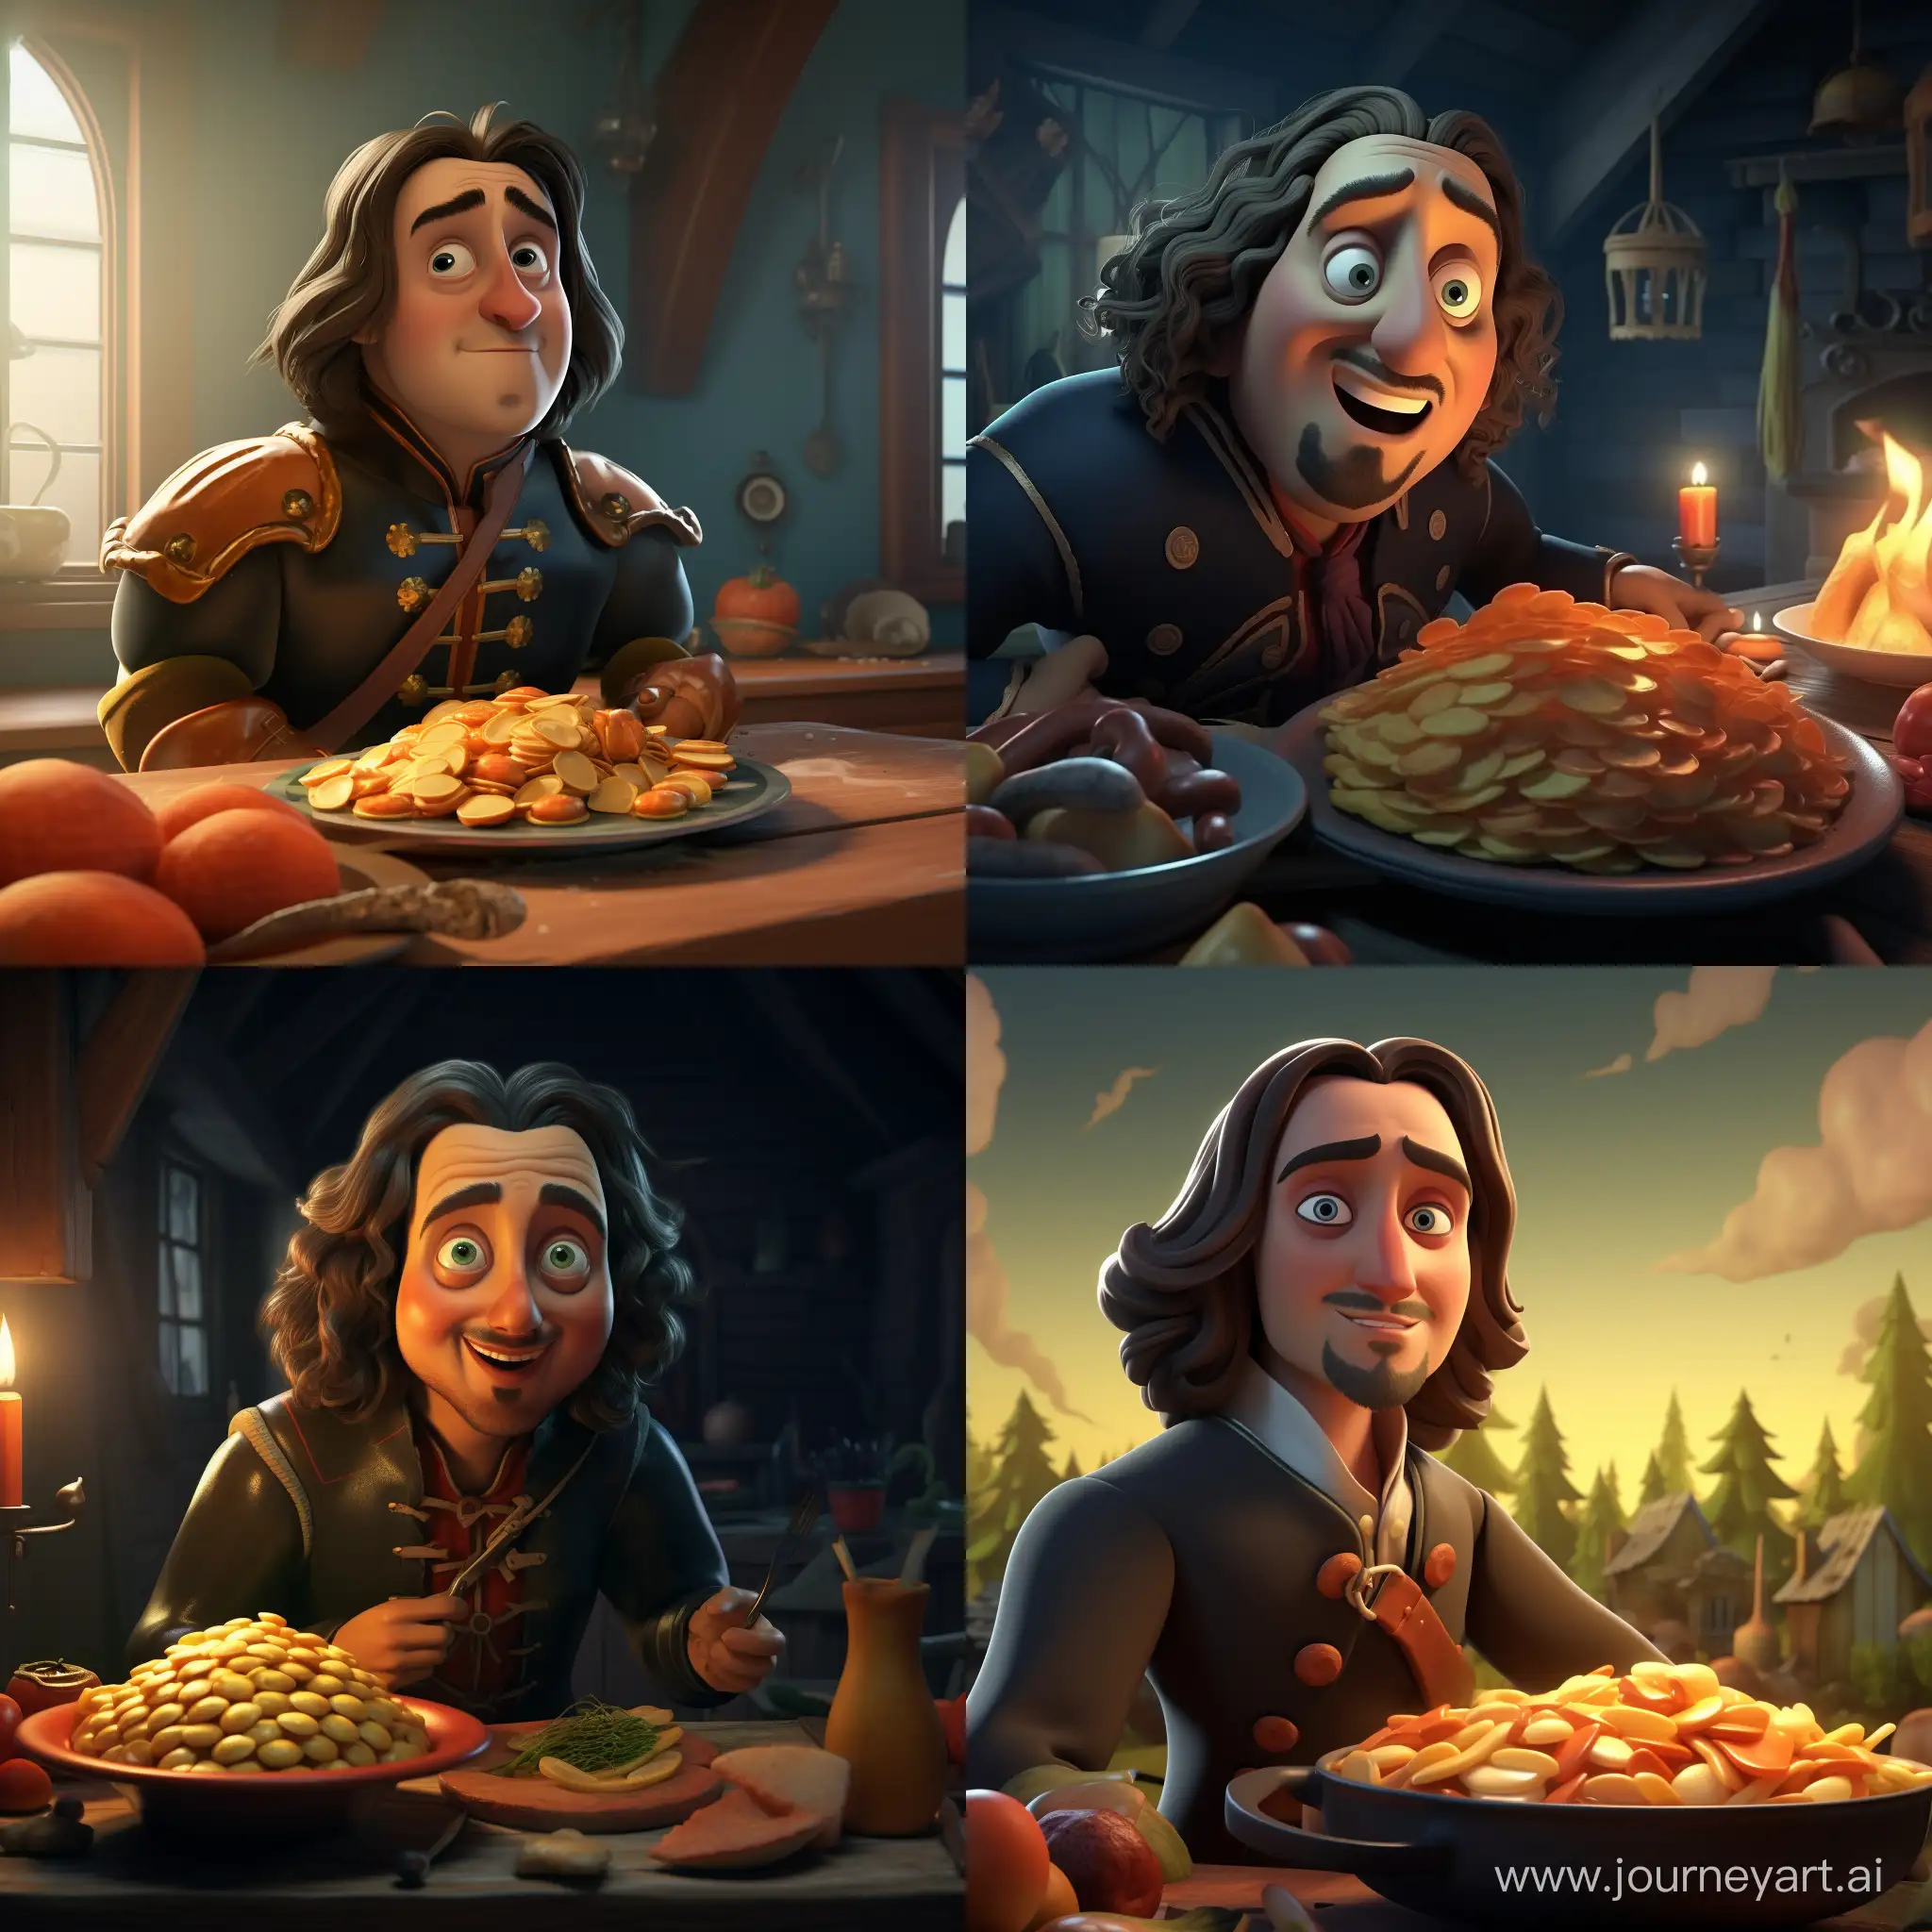 Peter-the-Great-Enjoying-Potatoes-3D-Animation-Delight